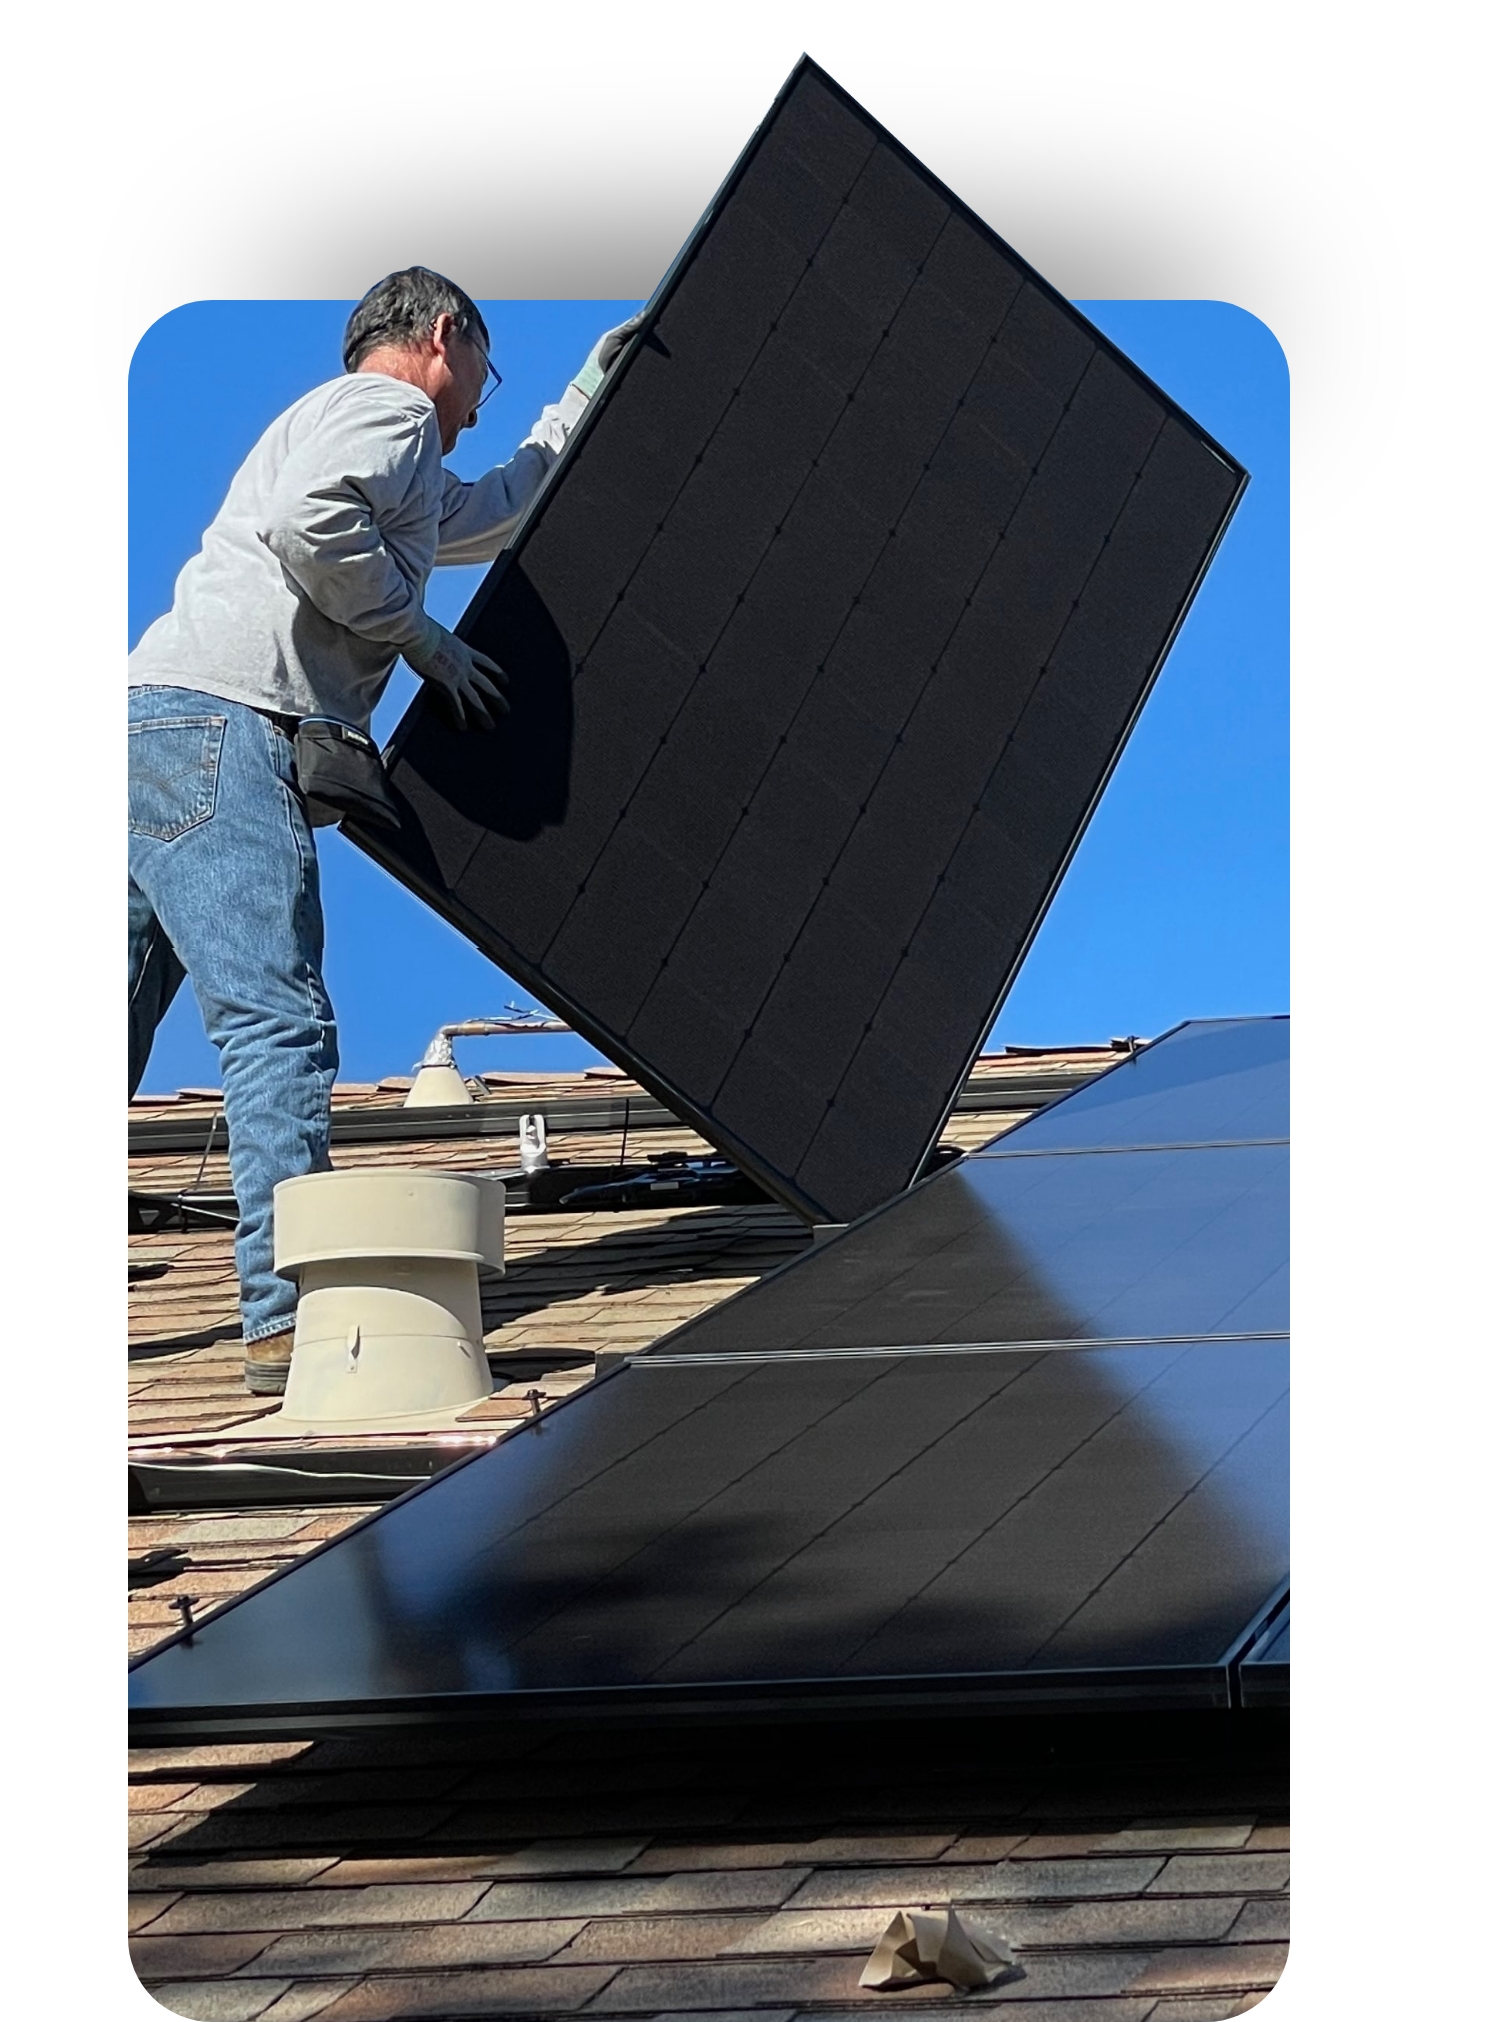 As one of the best solar companies in Colorado, we can help you go solar with free estimate and no upfront cost in Castle Pines and all around Denver, CO